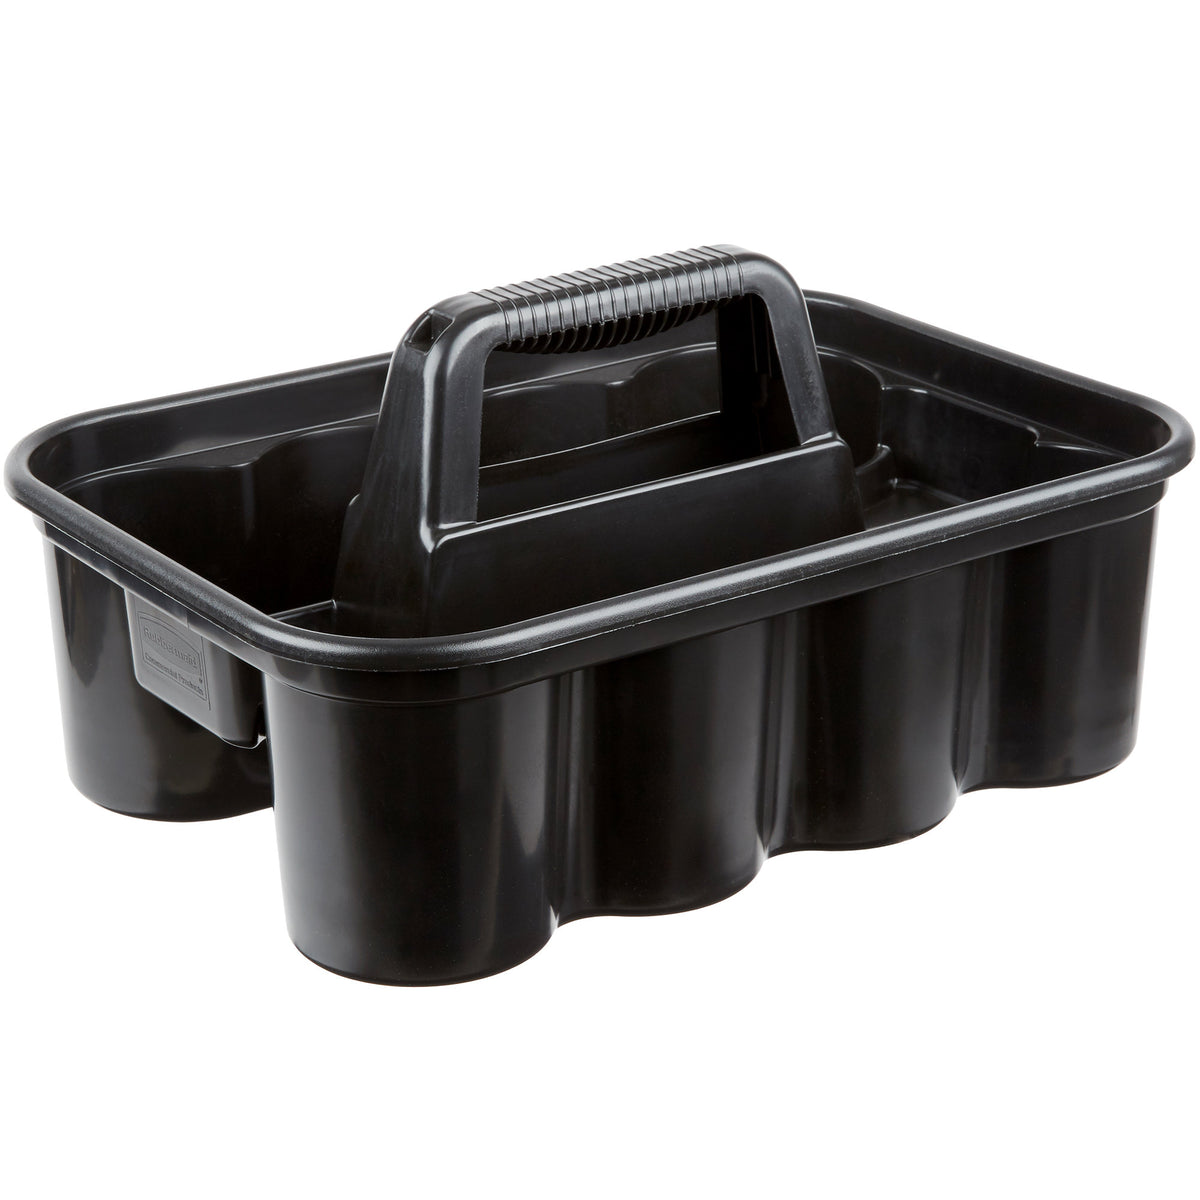 CADDY/ Maid's Carry Caddy with Insert, each – Croaker, Inc